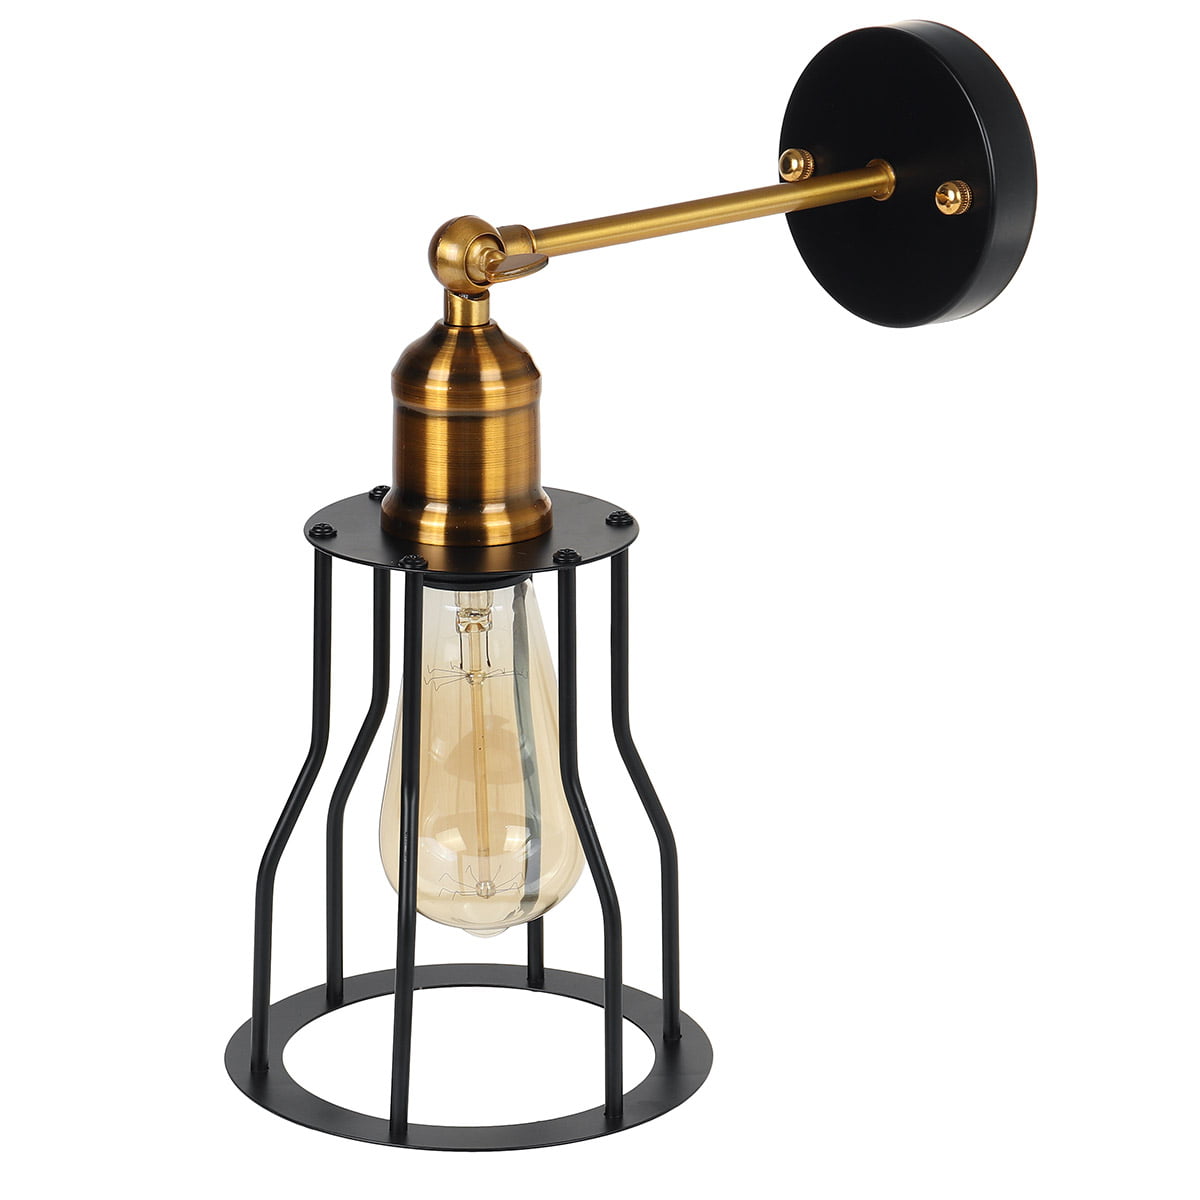 Industrial Retro Vintage Sconce Wire Cage Wall Light Fixture Home Decor 